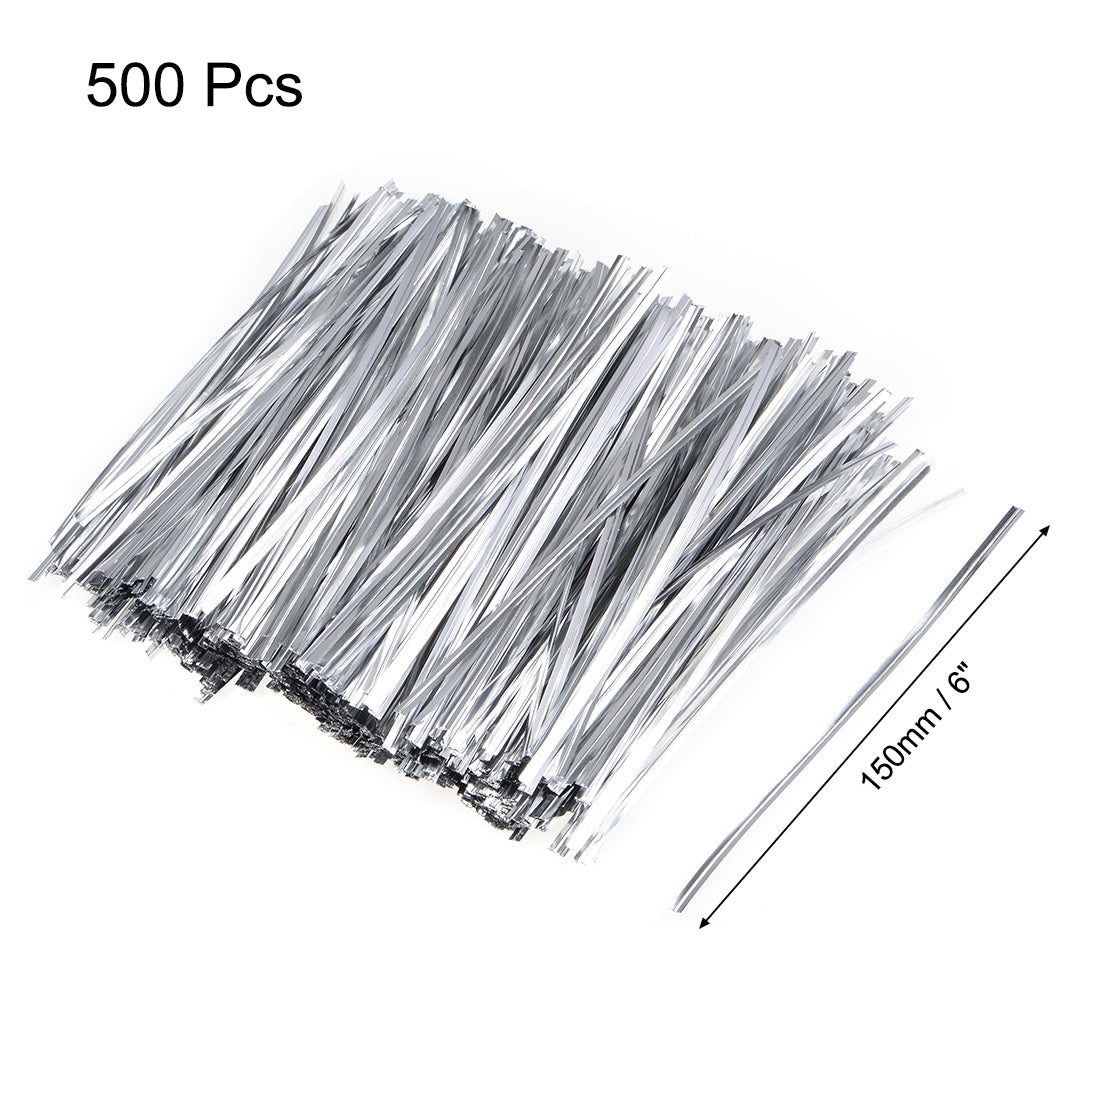 uxcell Uxcell Long Strong Twist Ties 5.9 Inches Quality Plastic Closure Tie for Tying Gift Bags Art Craft Ties Manage Cords Silvery 500pcs